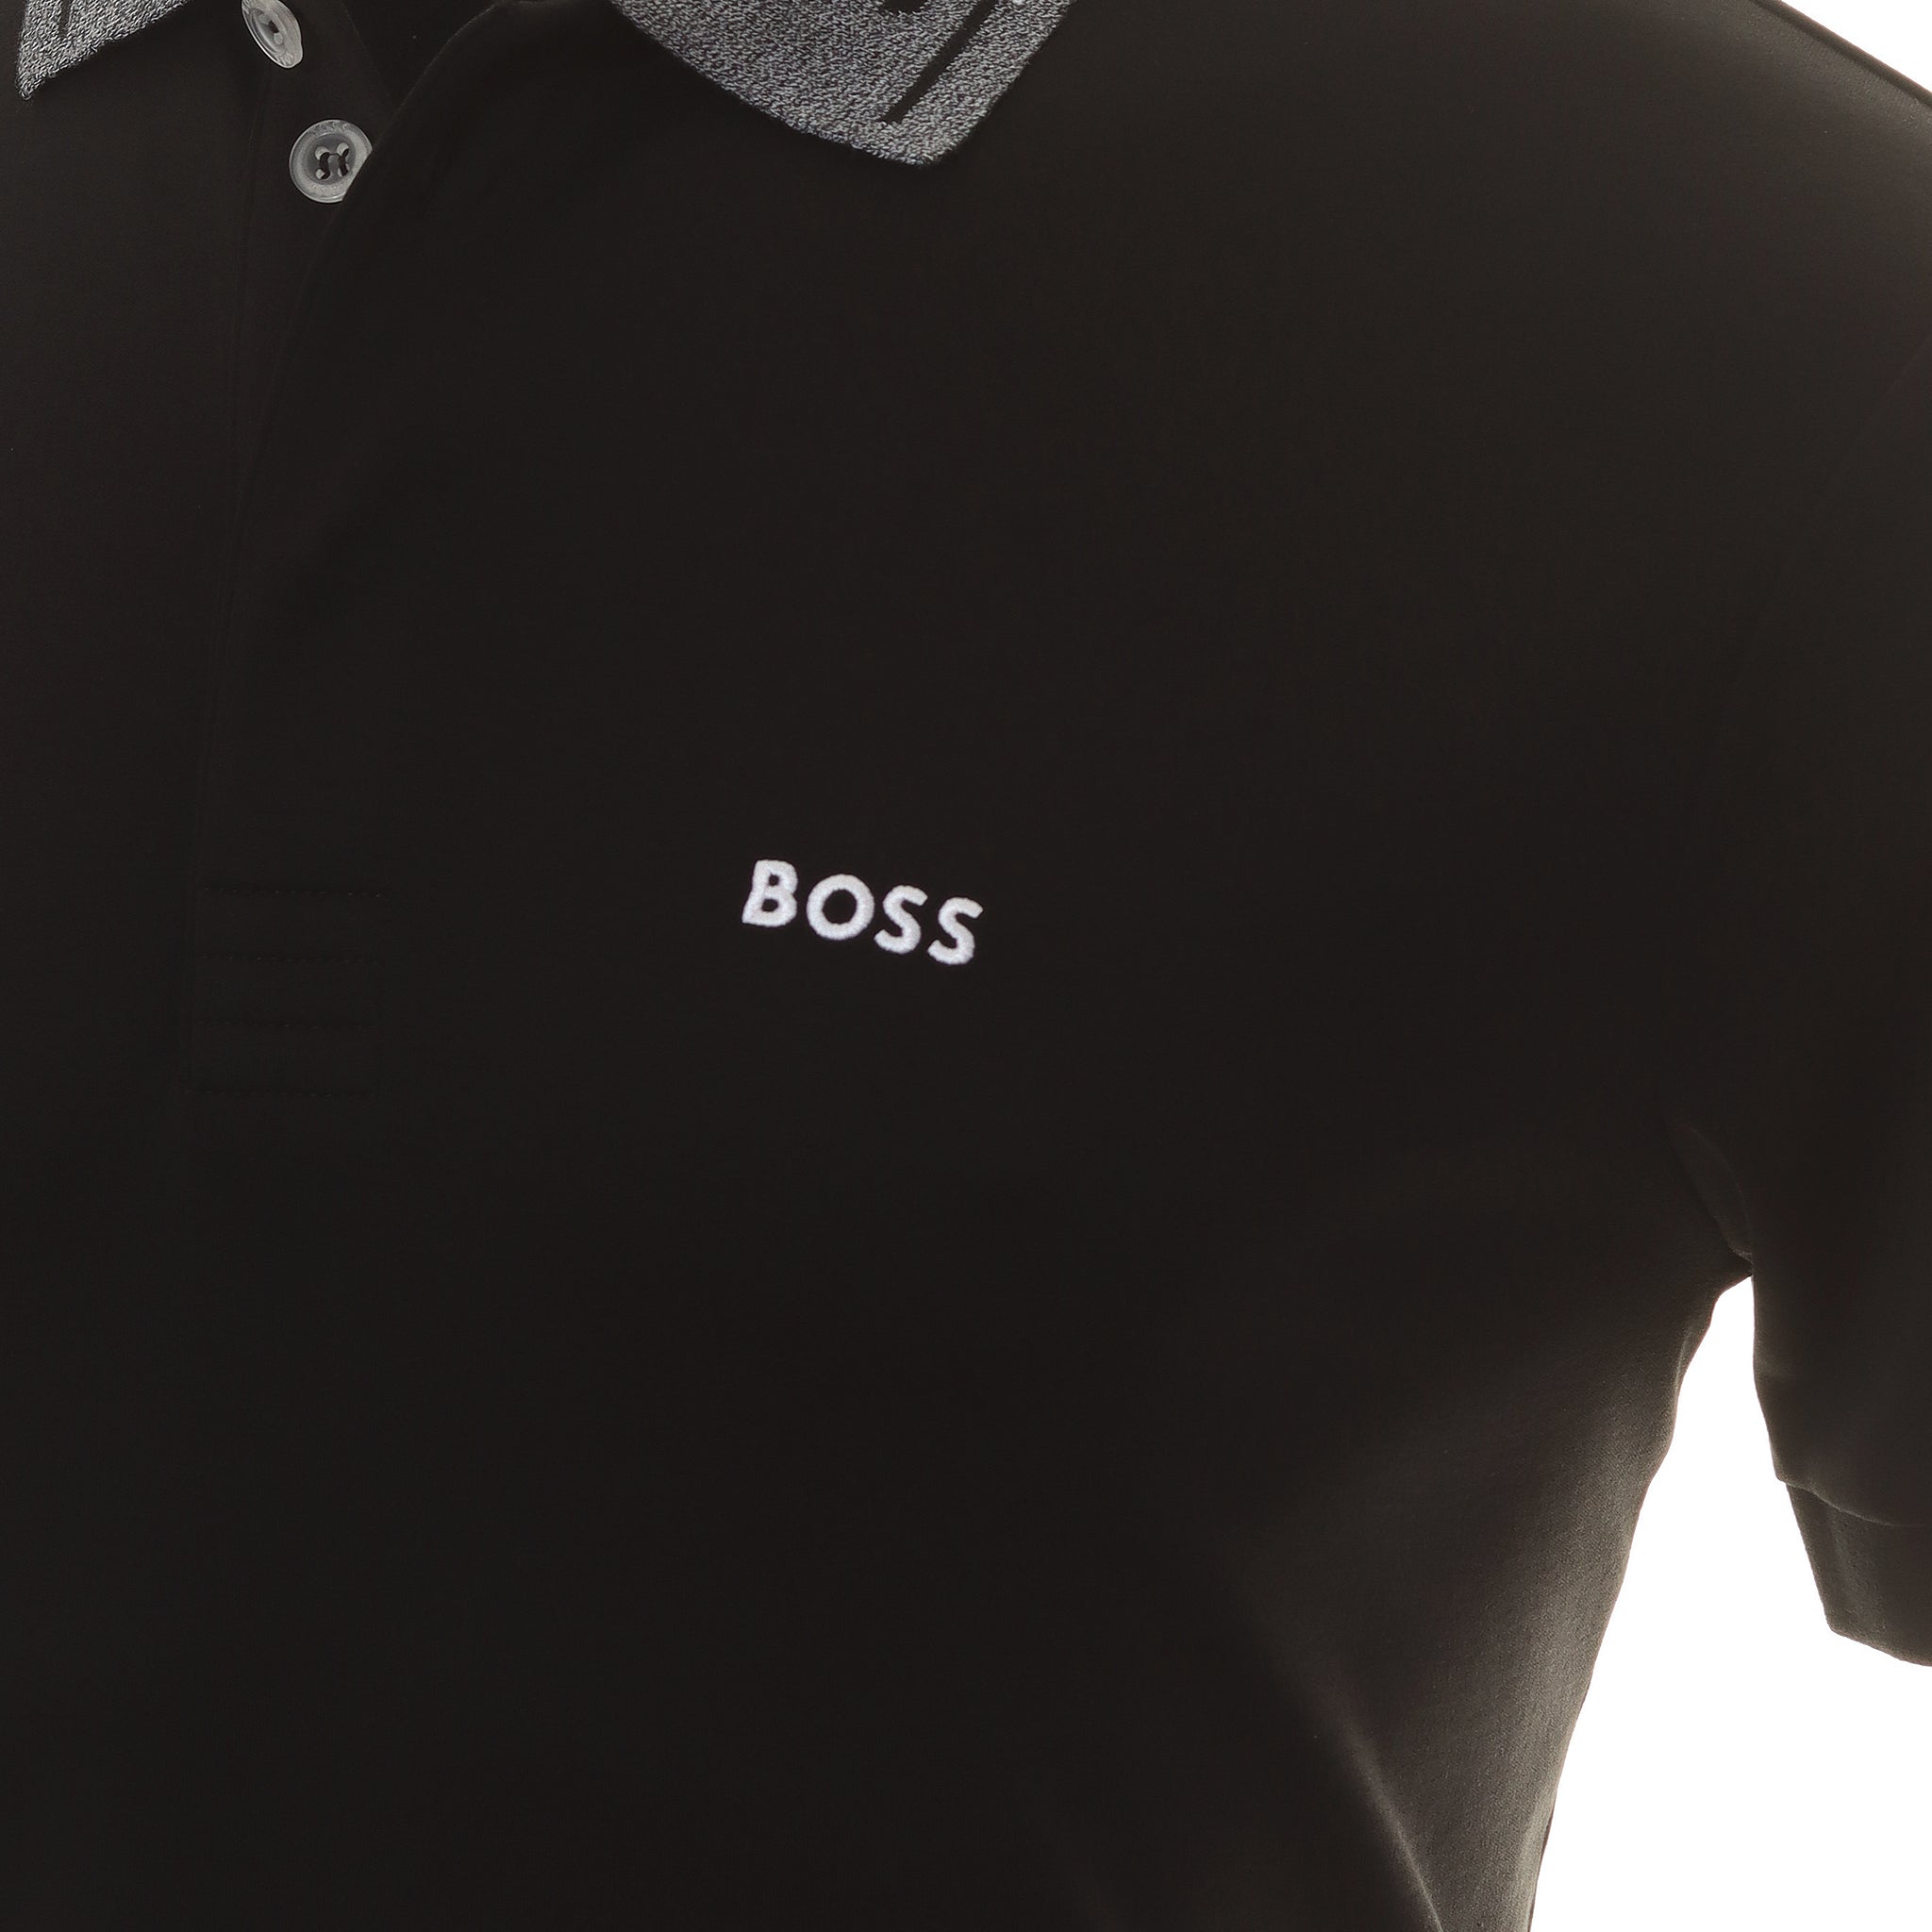 BOSS Paddy 1 Polo Shirt WI23 50501217 Black 001 | Function18 | Restrictedgs